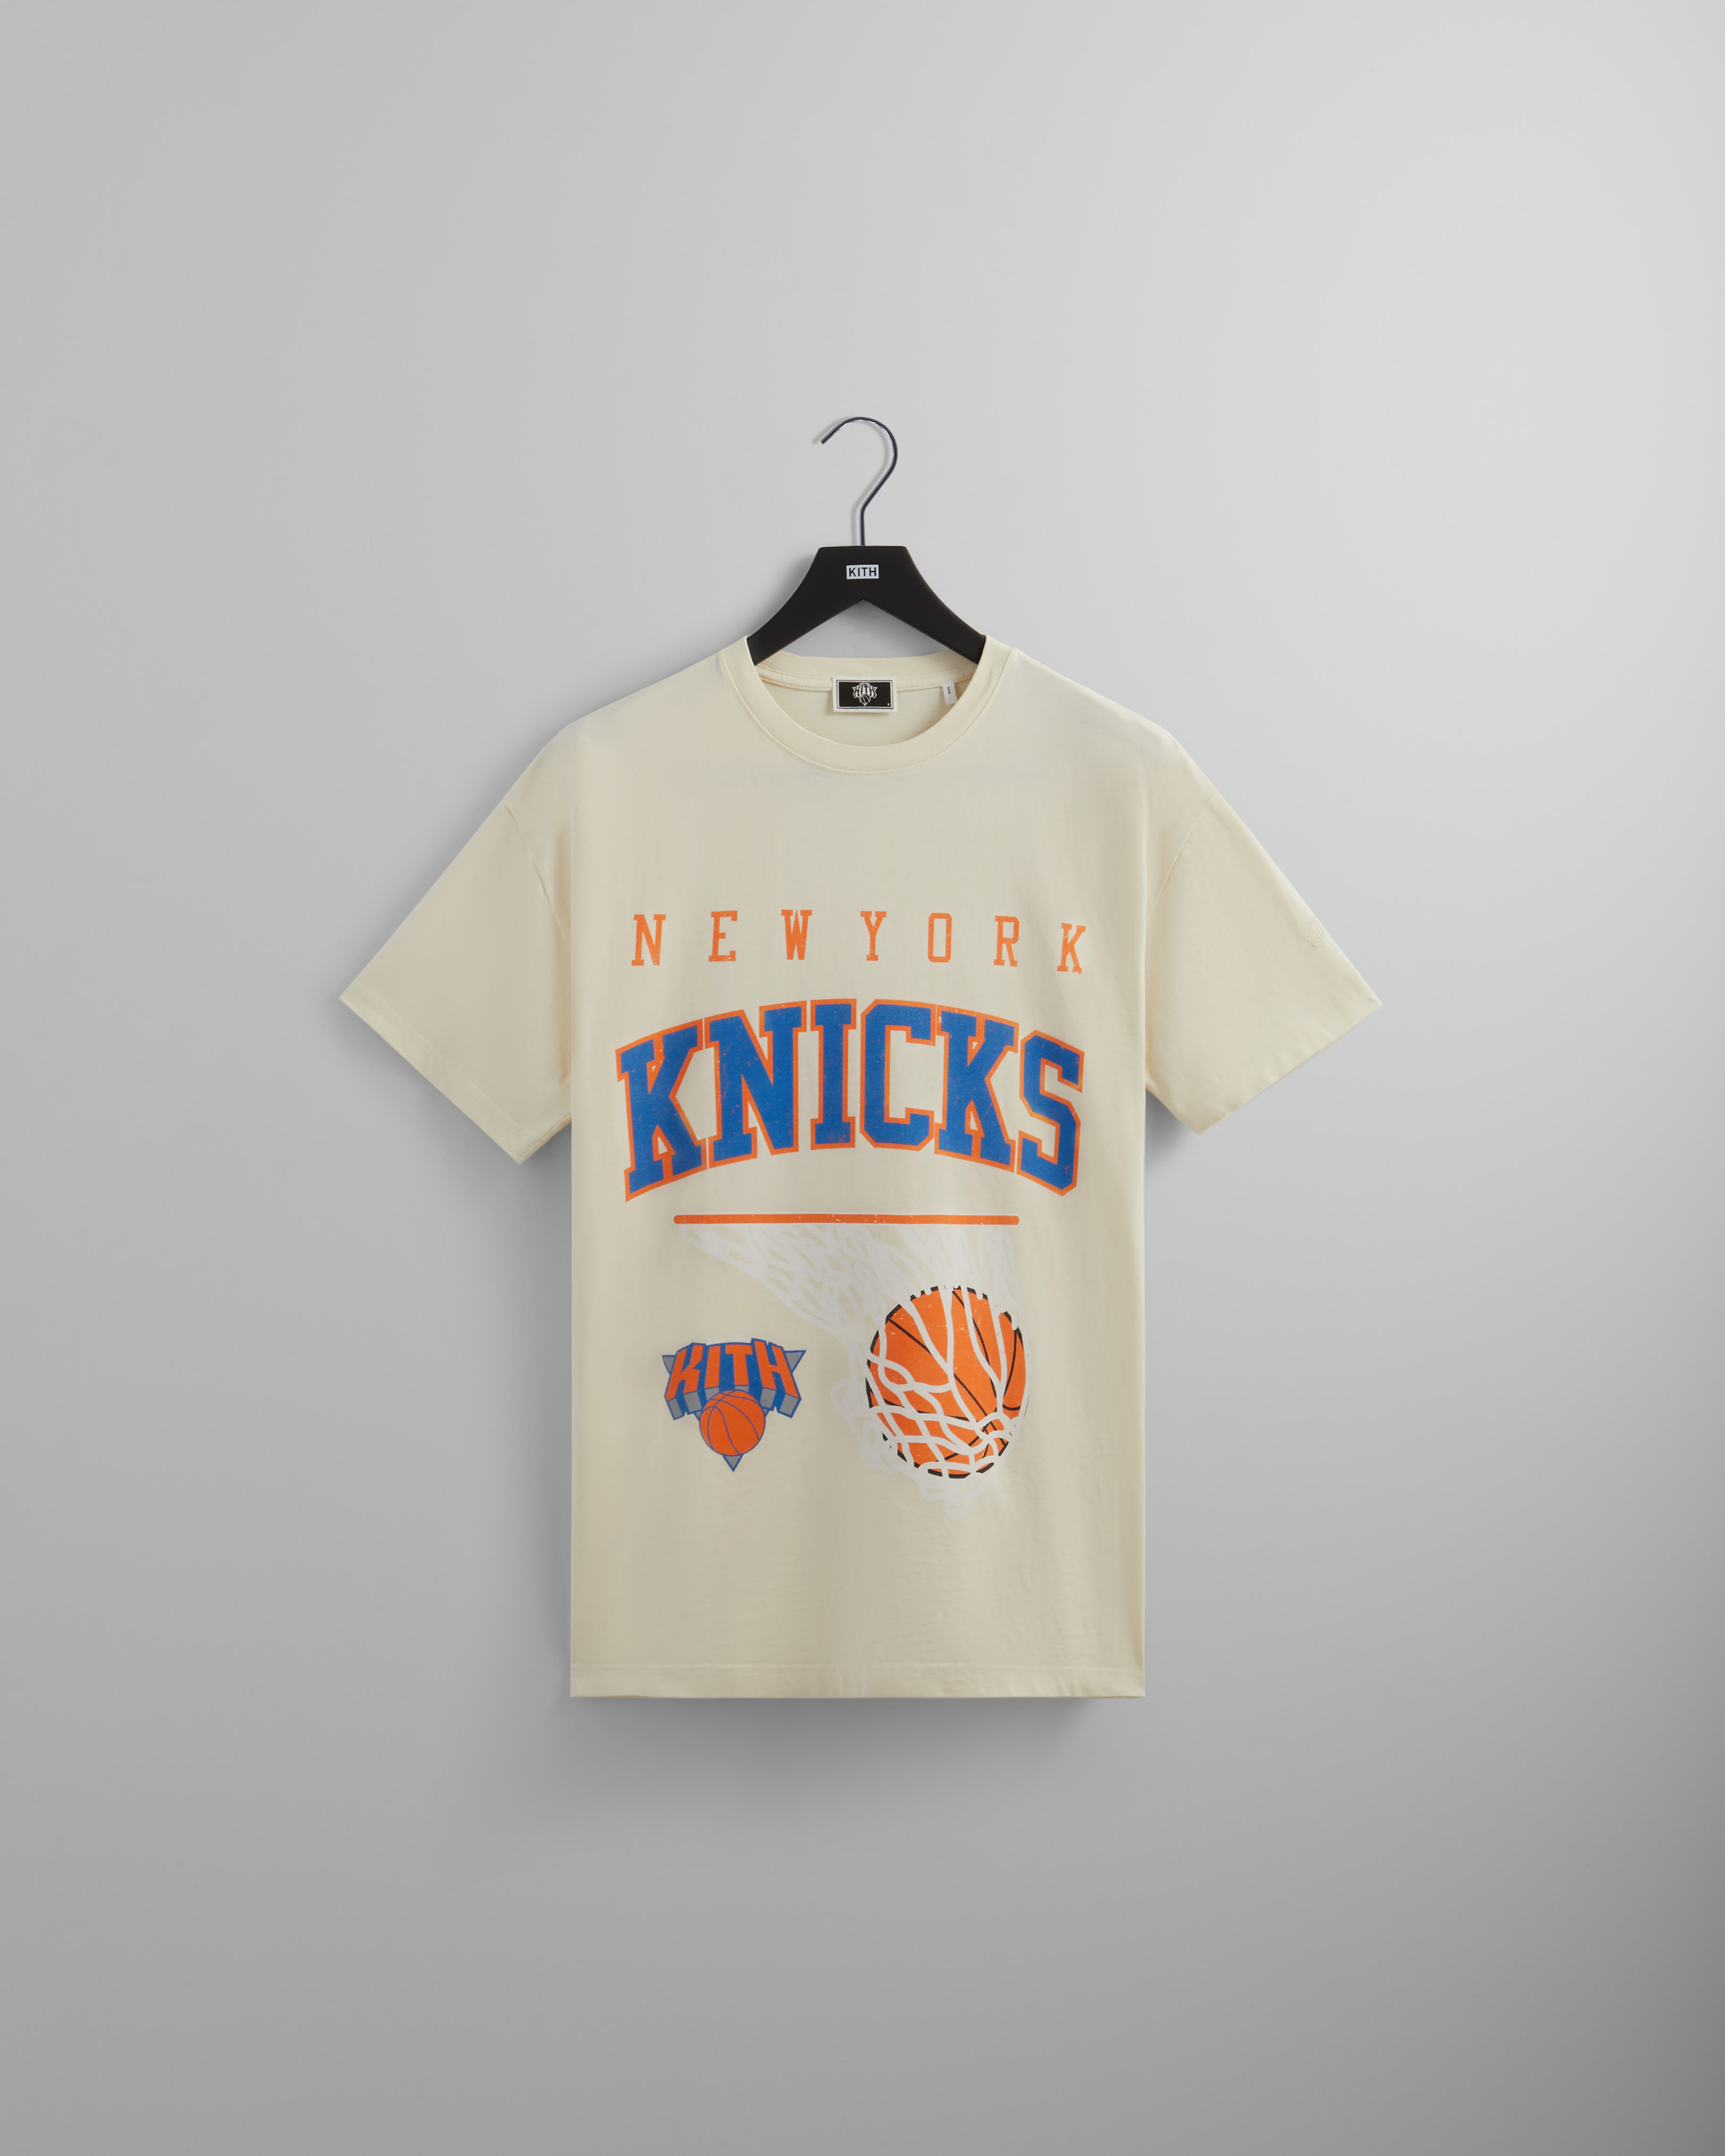 The Kith and New York Knicks 2022 collection